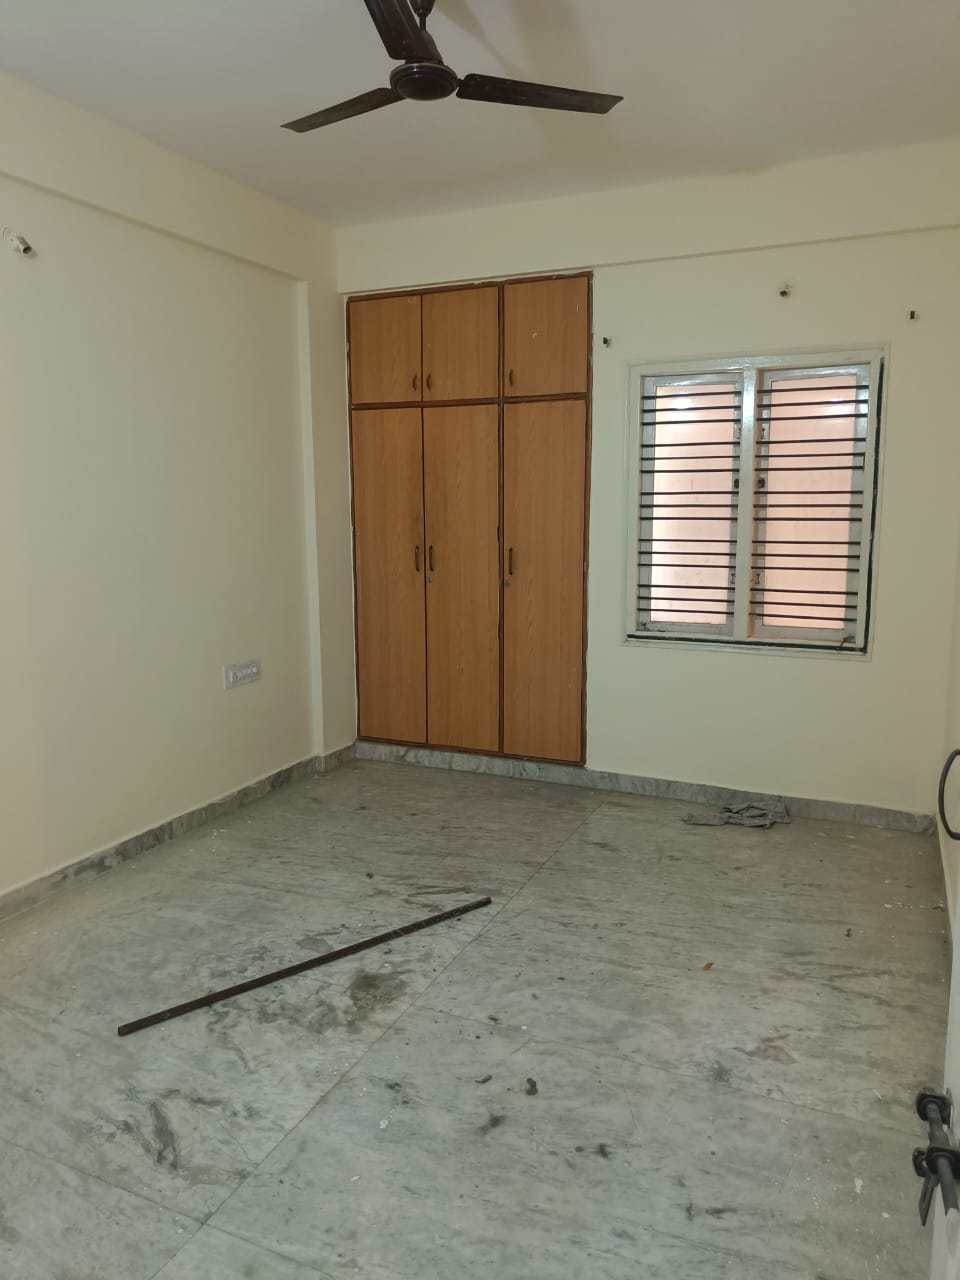 2 BHK Independent House for Lease Only at JAML2 - 1697 in M.S. Ramaiah Nagar